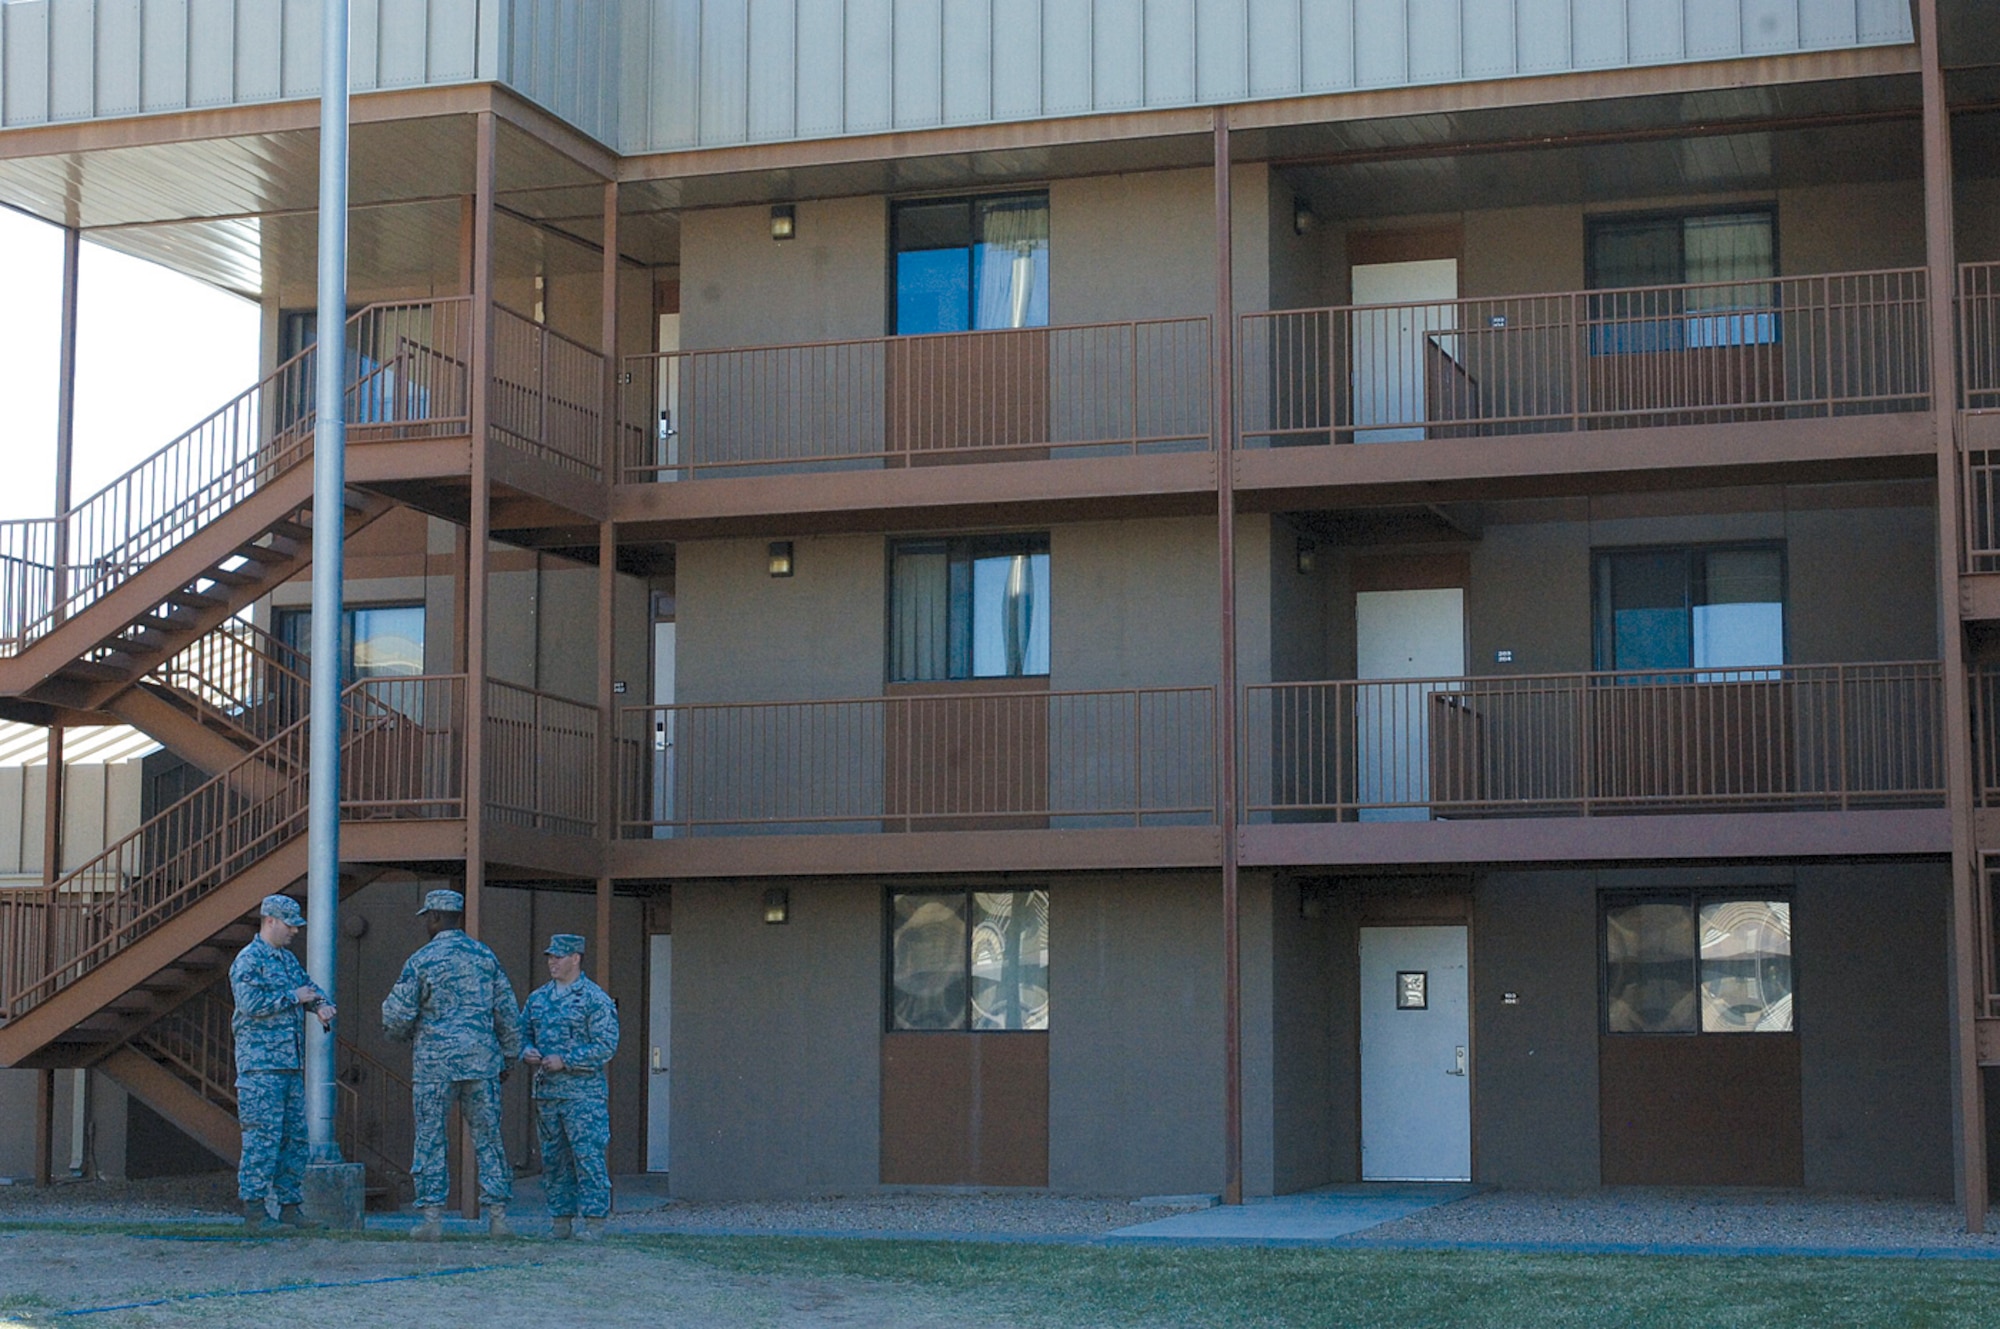 Staff Sgts. Kevin Zois, Leon Russell and Zachary Hildebrand, 56th Civil Engineer Squadron dorm managers, chat outside at Luke Air Force Base. Four dorms managers oversee the 11 dorms on base which houses 780 Airmen. (U.S. Air Force photo by Deborah Silliman Wolfe)